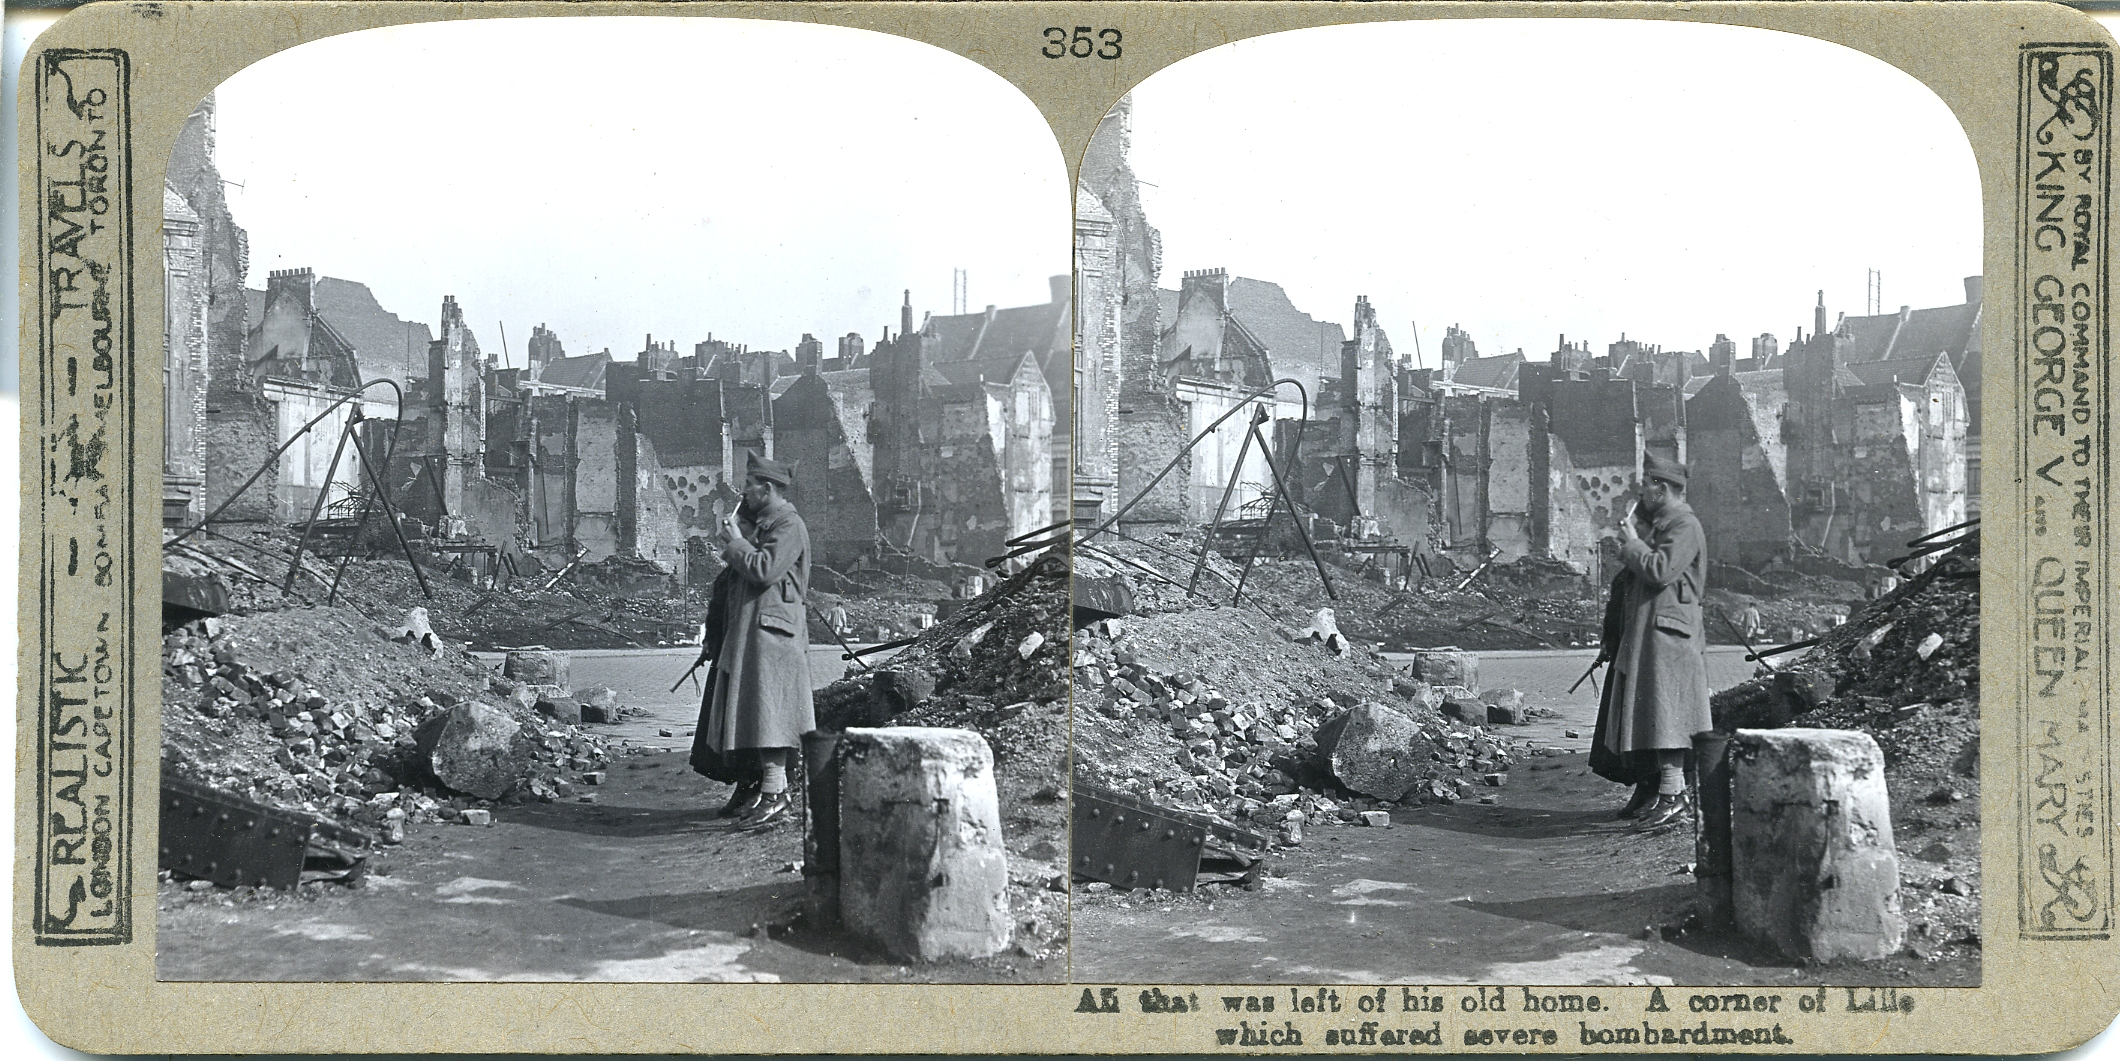 All that was left of his old home. A corner of Lille which suffered severe bombardment